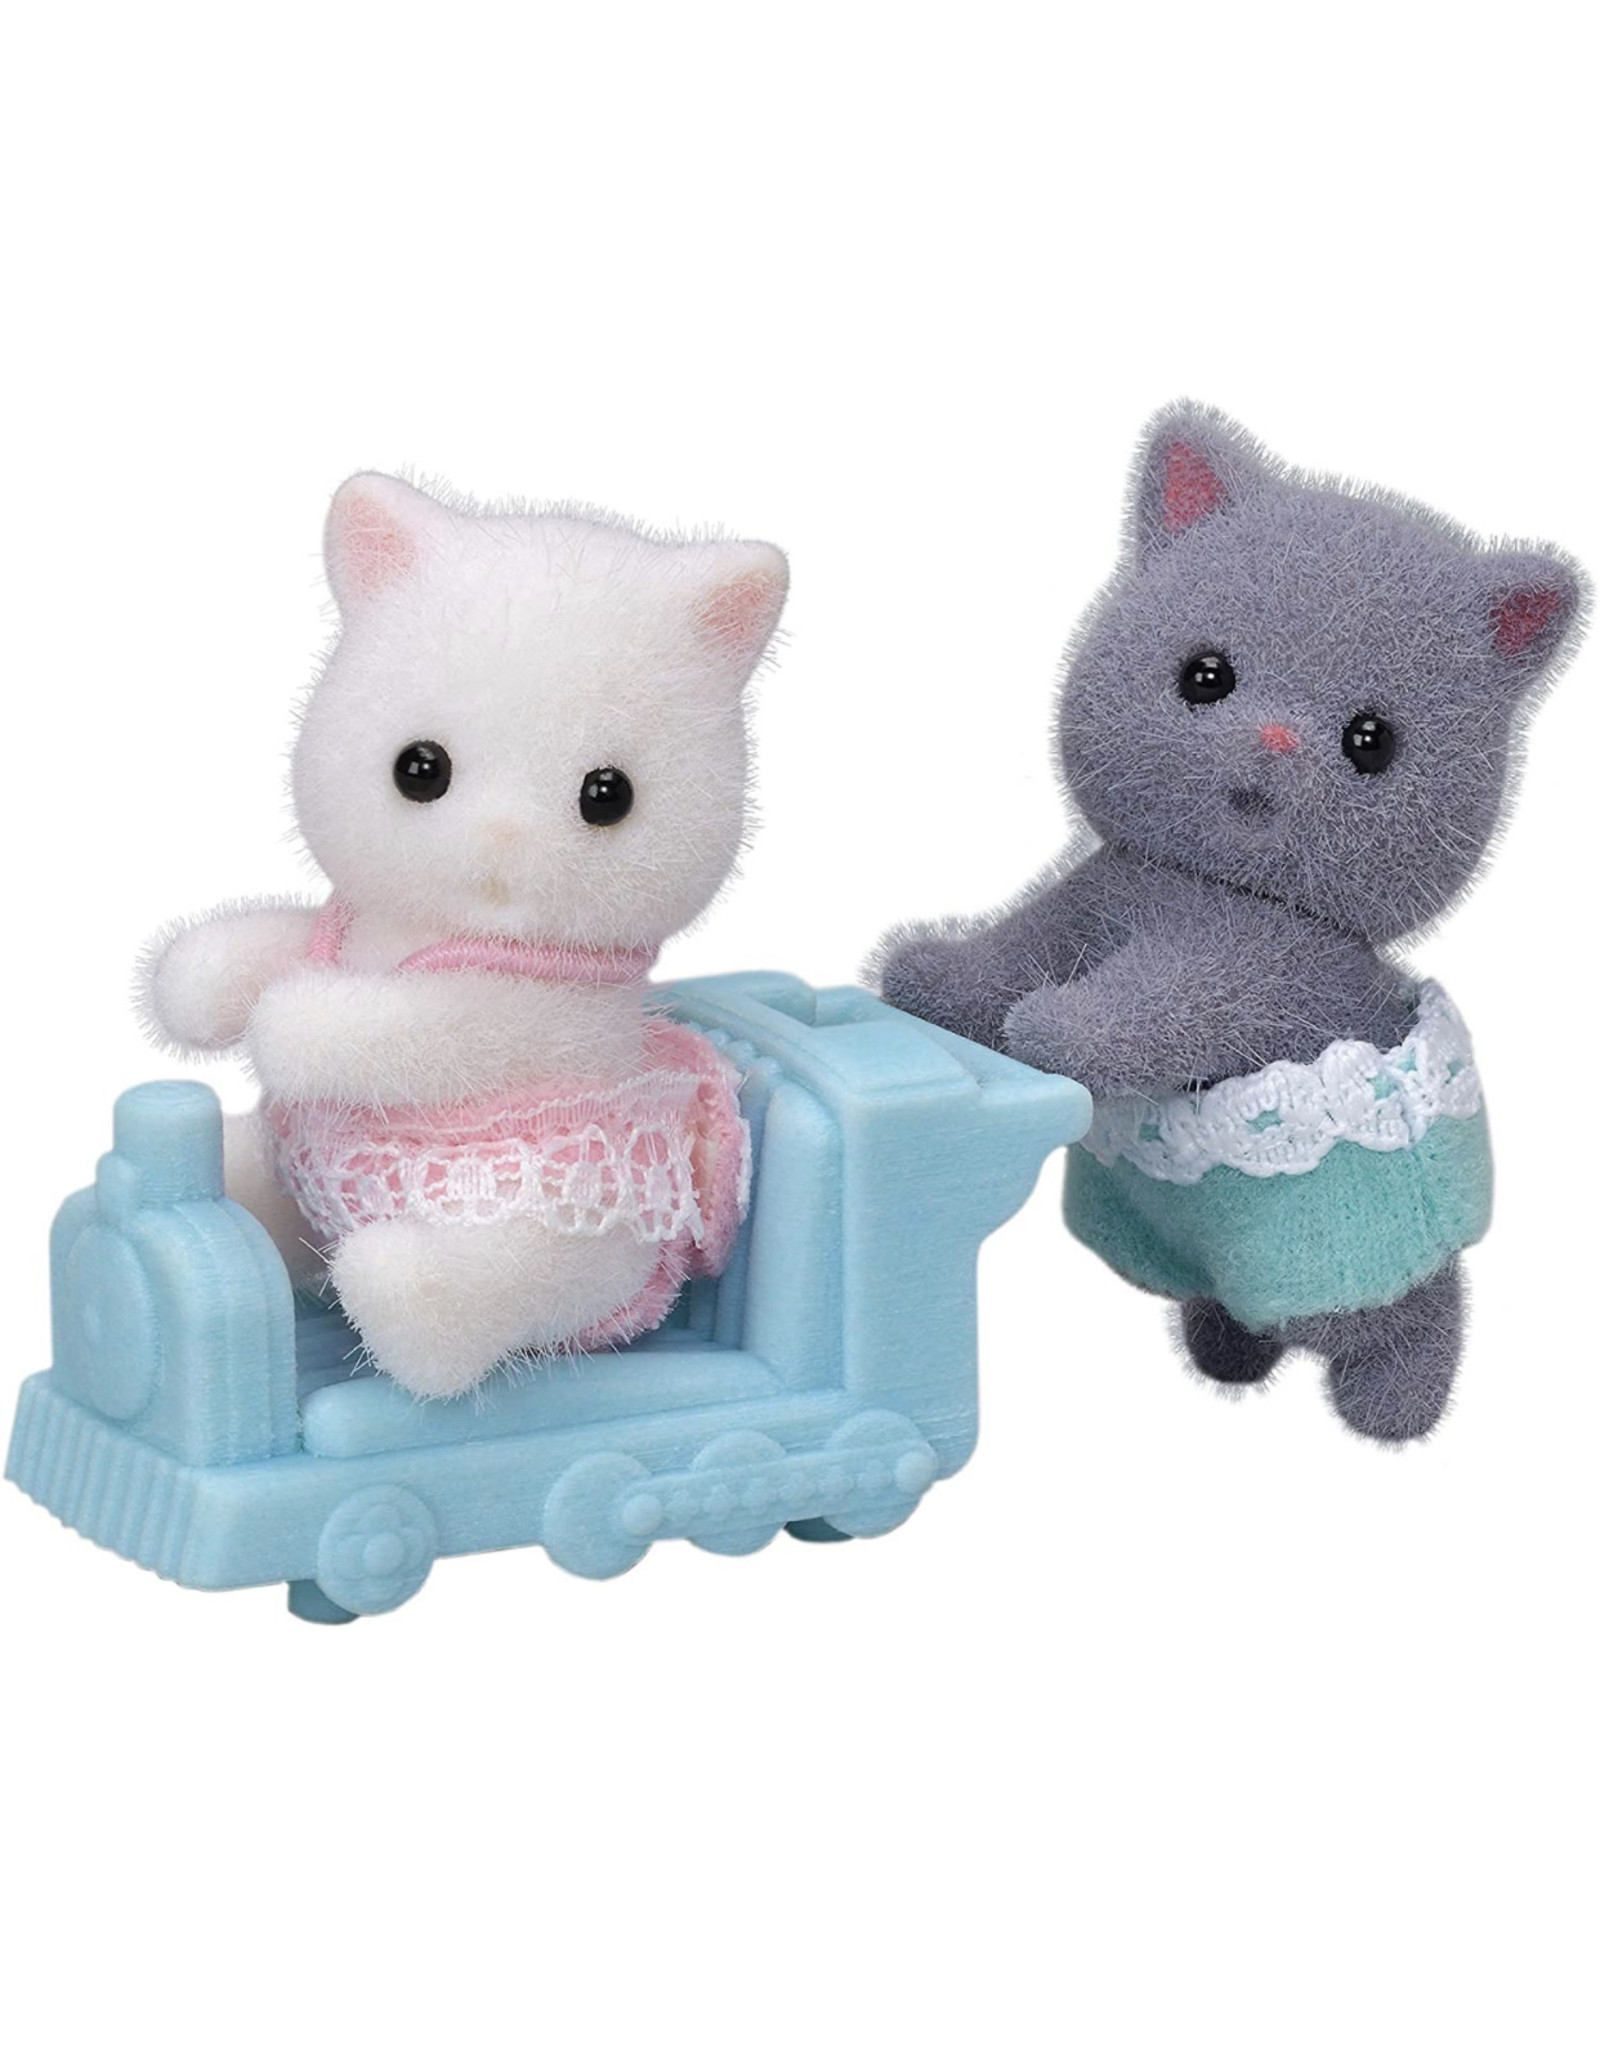 Calico Critters Calico Critters Persian Cat Twins